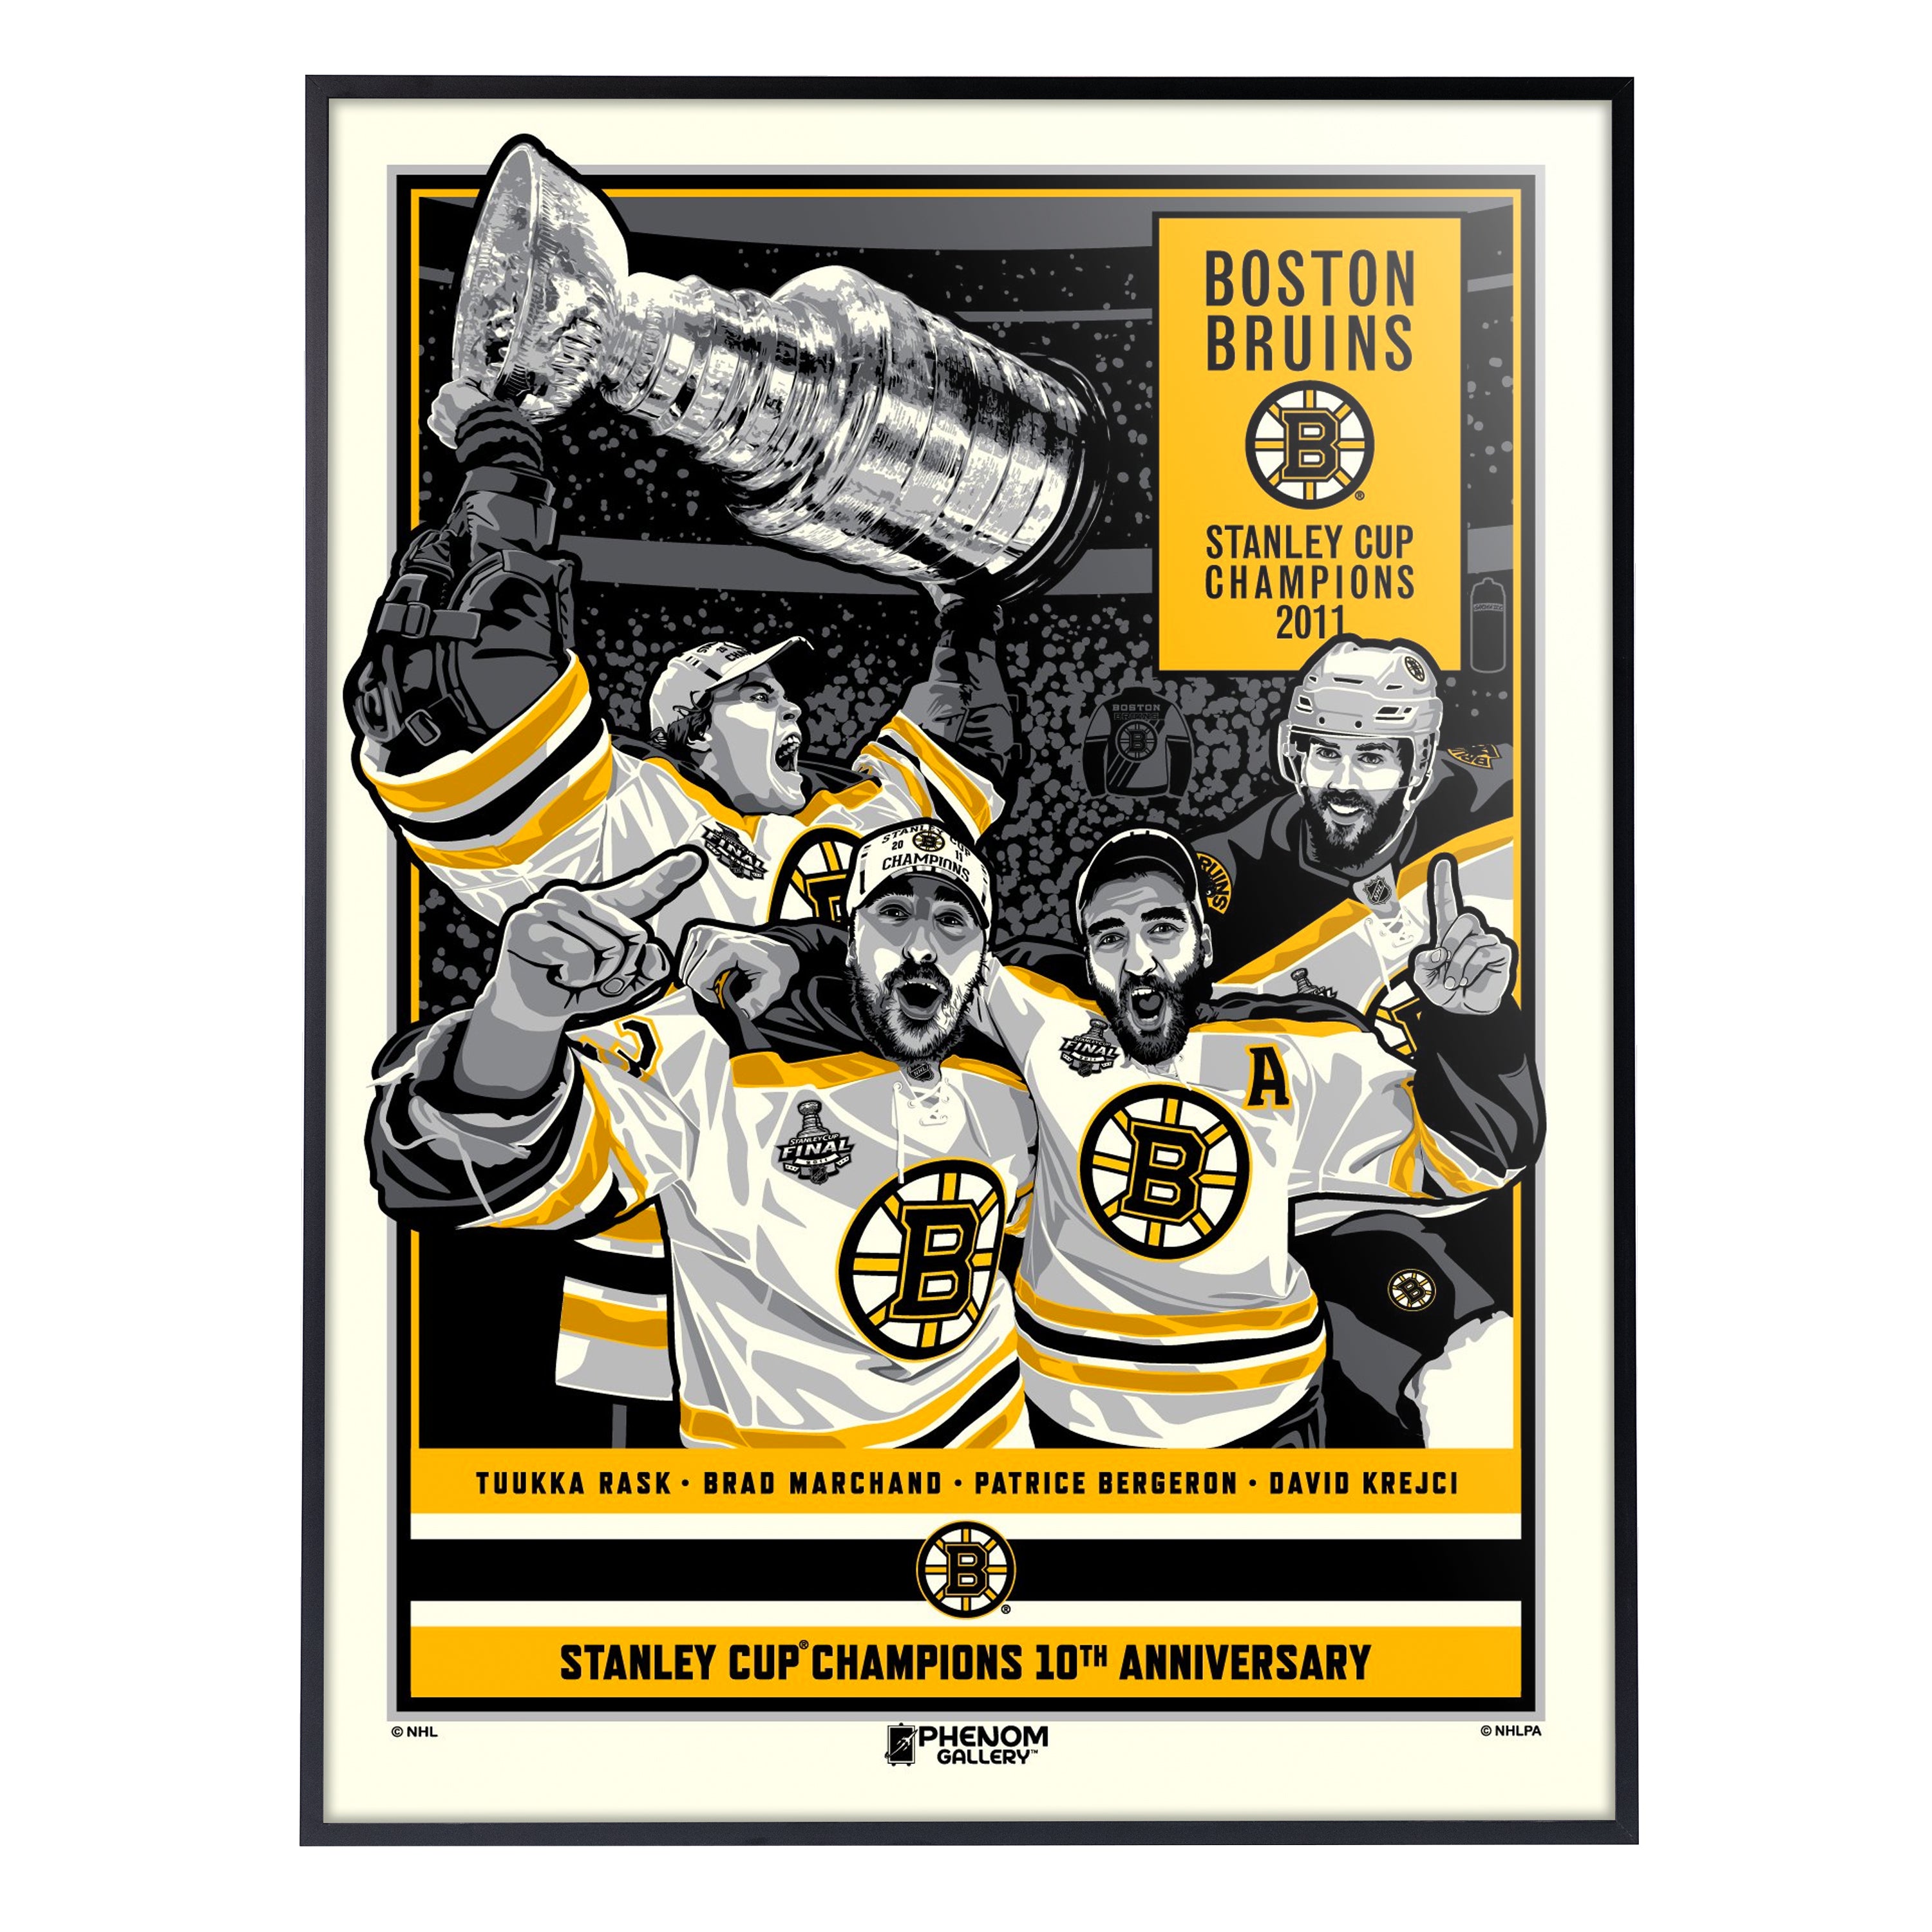 Bruins Shirt Stanley Cup Champions 2011 Boston Bruins Gift - Personalized  Gifts: Family, Sports, Occasions, Trending